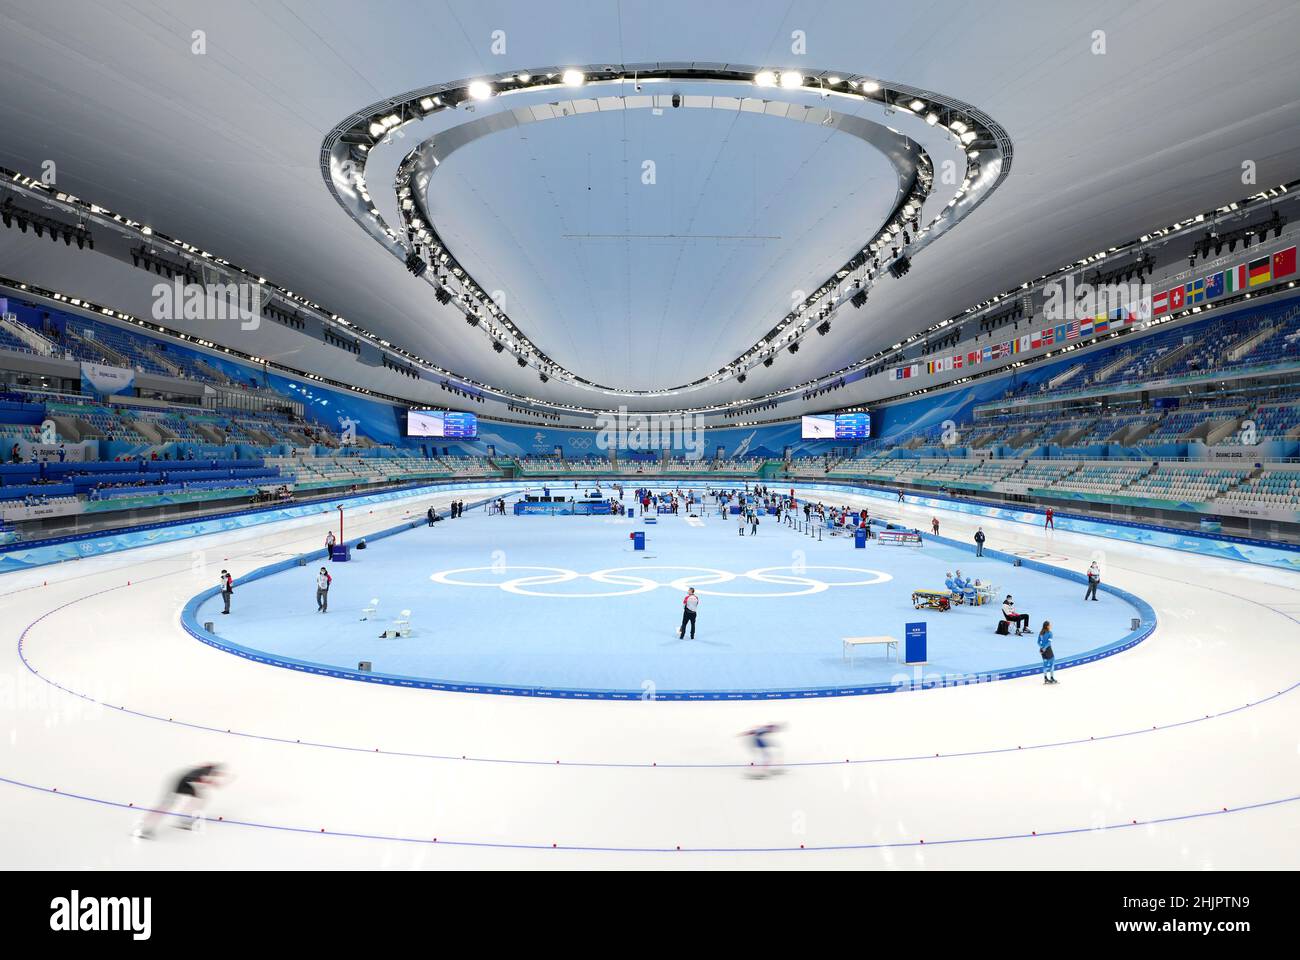 Beijing, China. 31st Jan, 2022. Athletes participate in the combined training at the National Speed Skating Oval in Beijing, capital of China, Jan. 31, 2022. Credit: Wang Fei/Xinhua/Alamy Live News Stock Photo